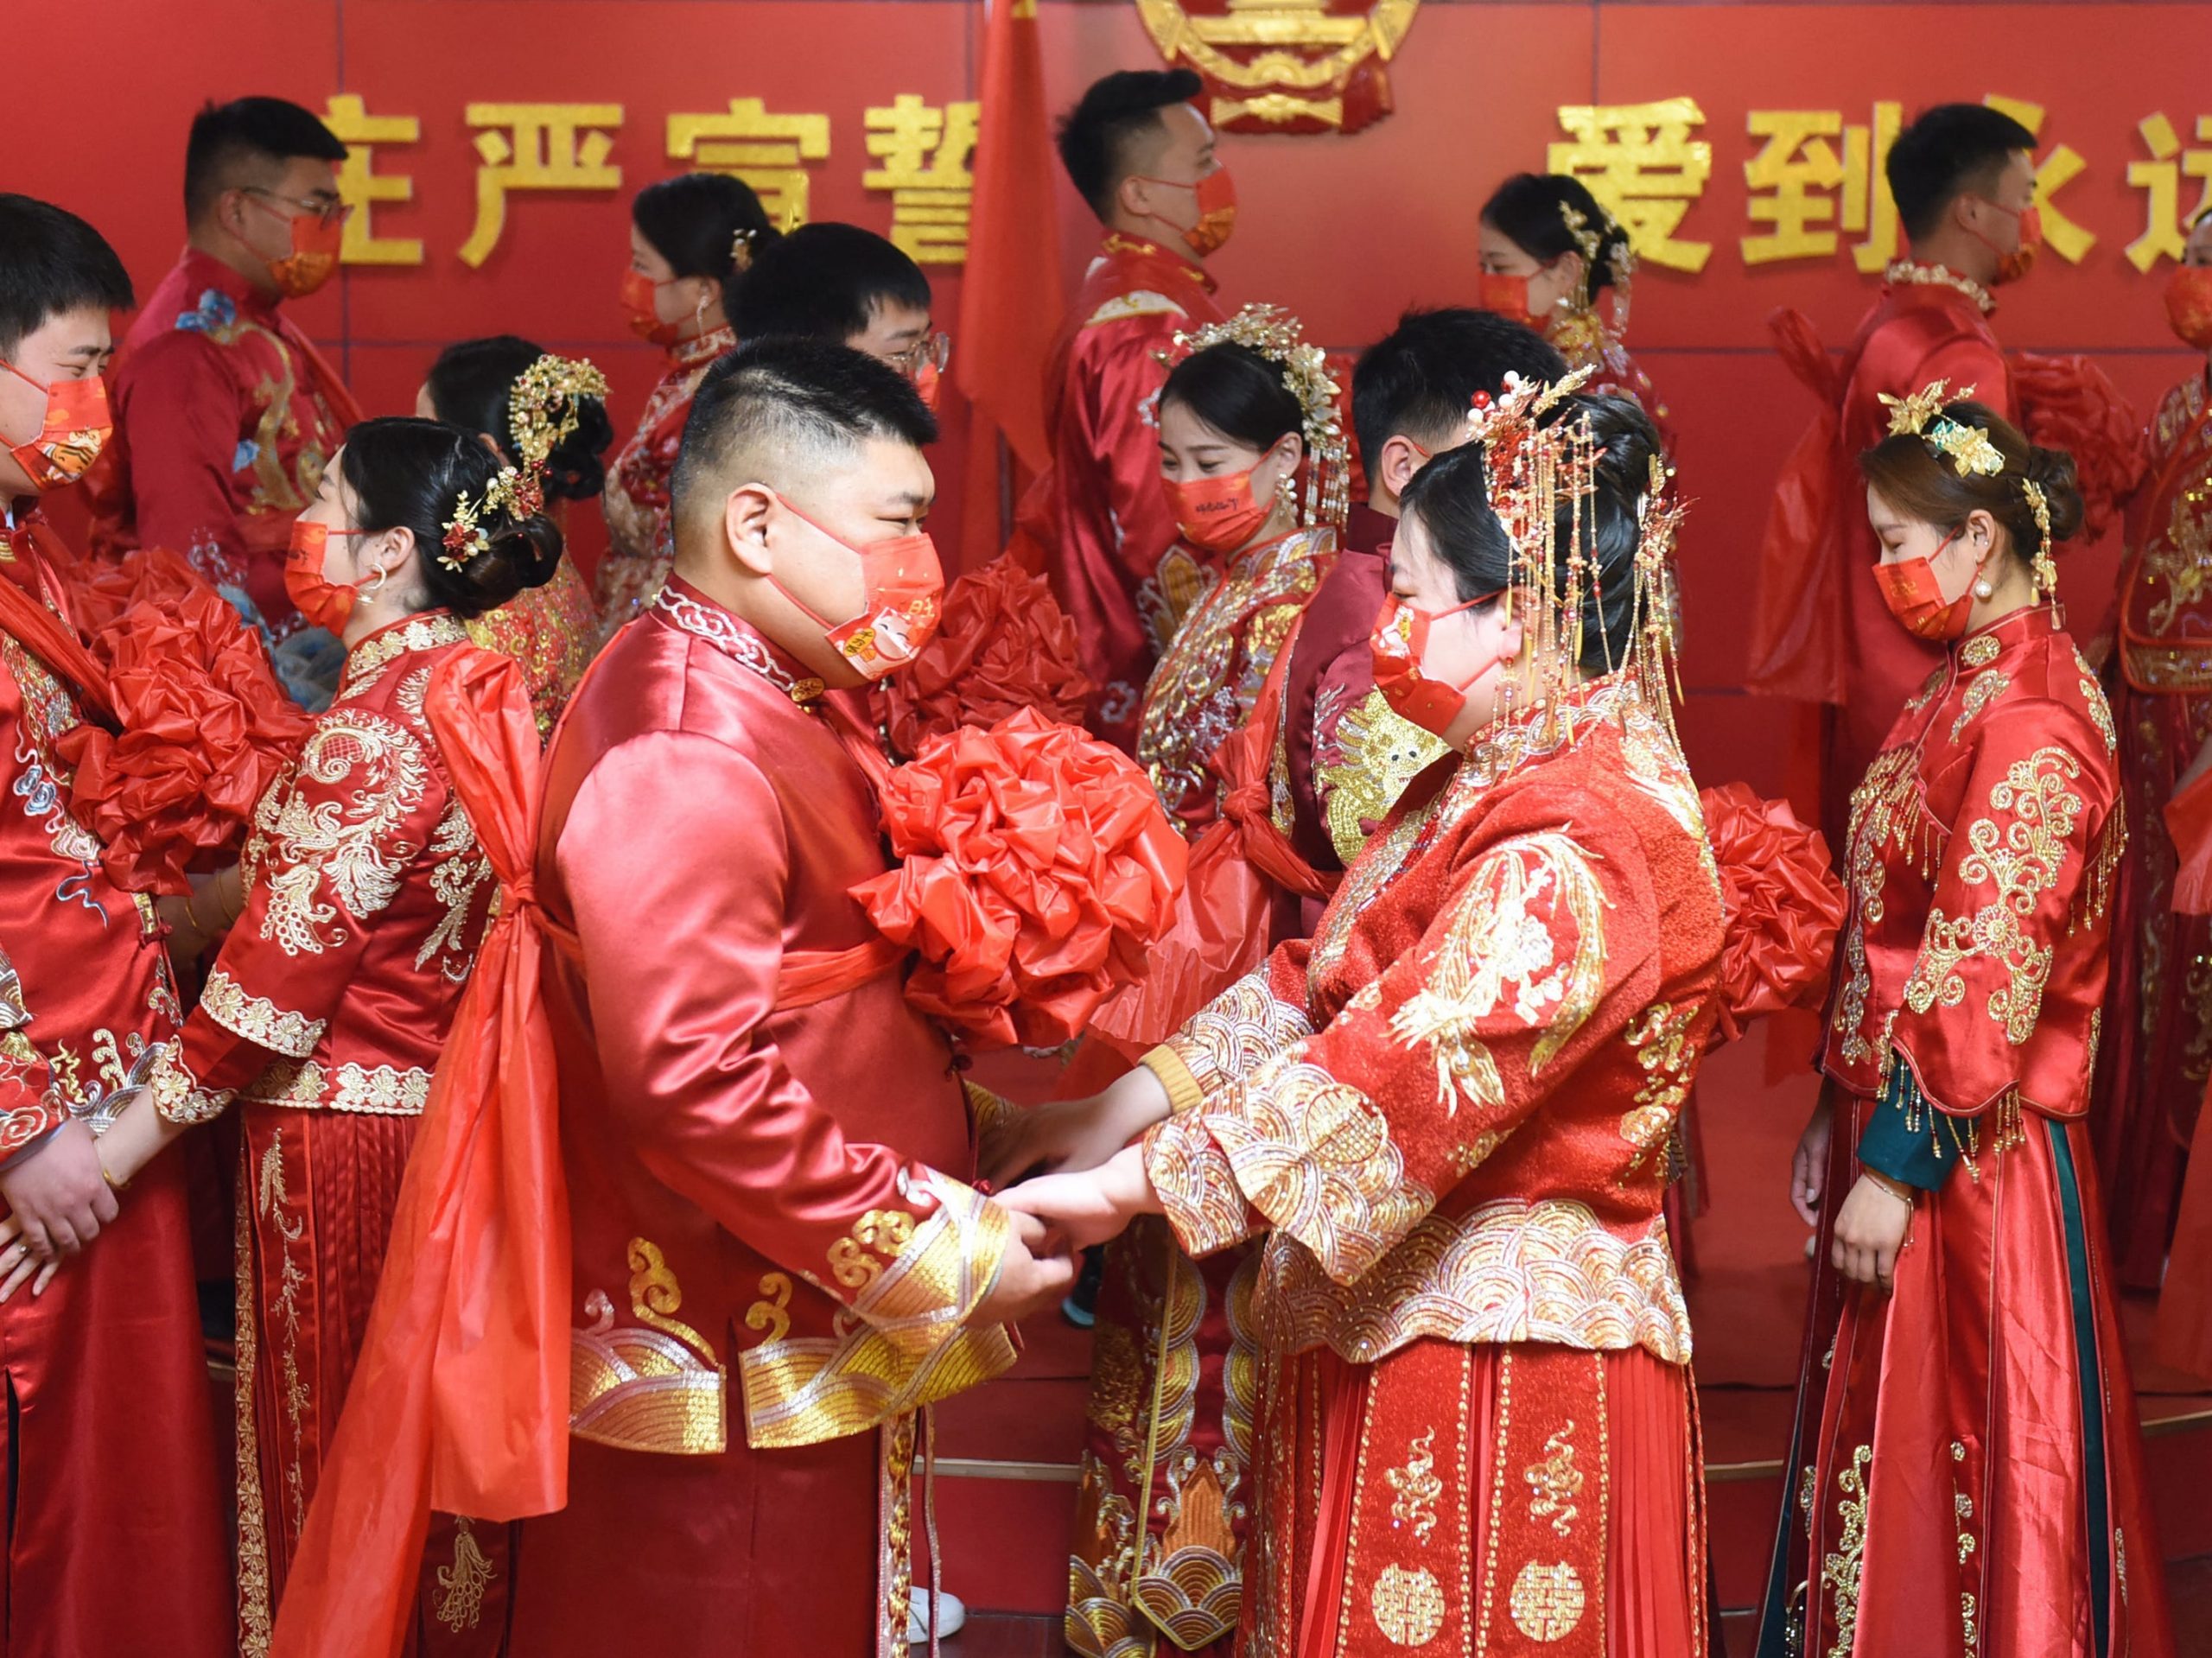 Couples attend a group wedding ceremony at a marriage registry in Donghai in China's eastern Jiangsu province on February 22, 2022, a palindrome day written as "22-2-22".